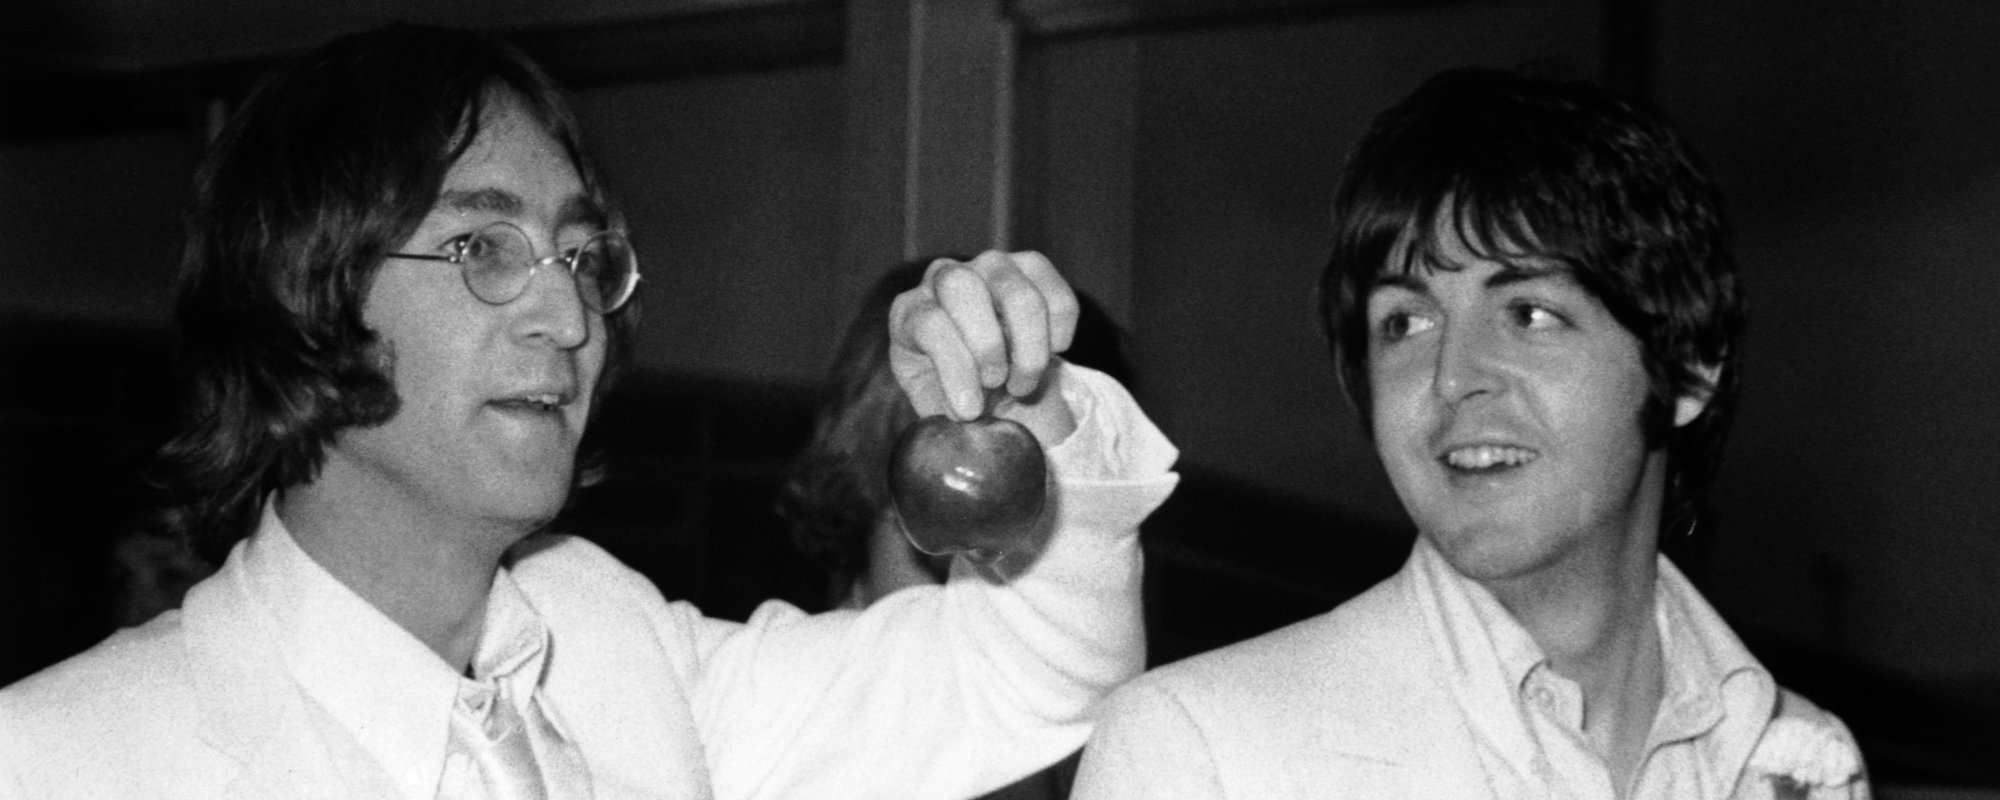 The Meaning Behind What Both Lennon and McCartney Called Their Favorite Beatles Song, “Here, There and Everywhere”